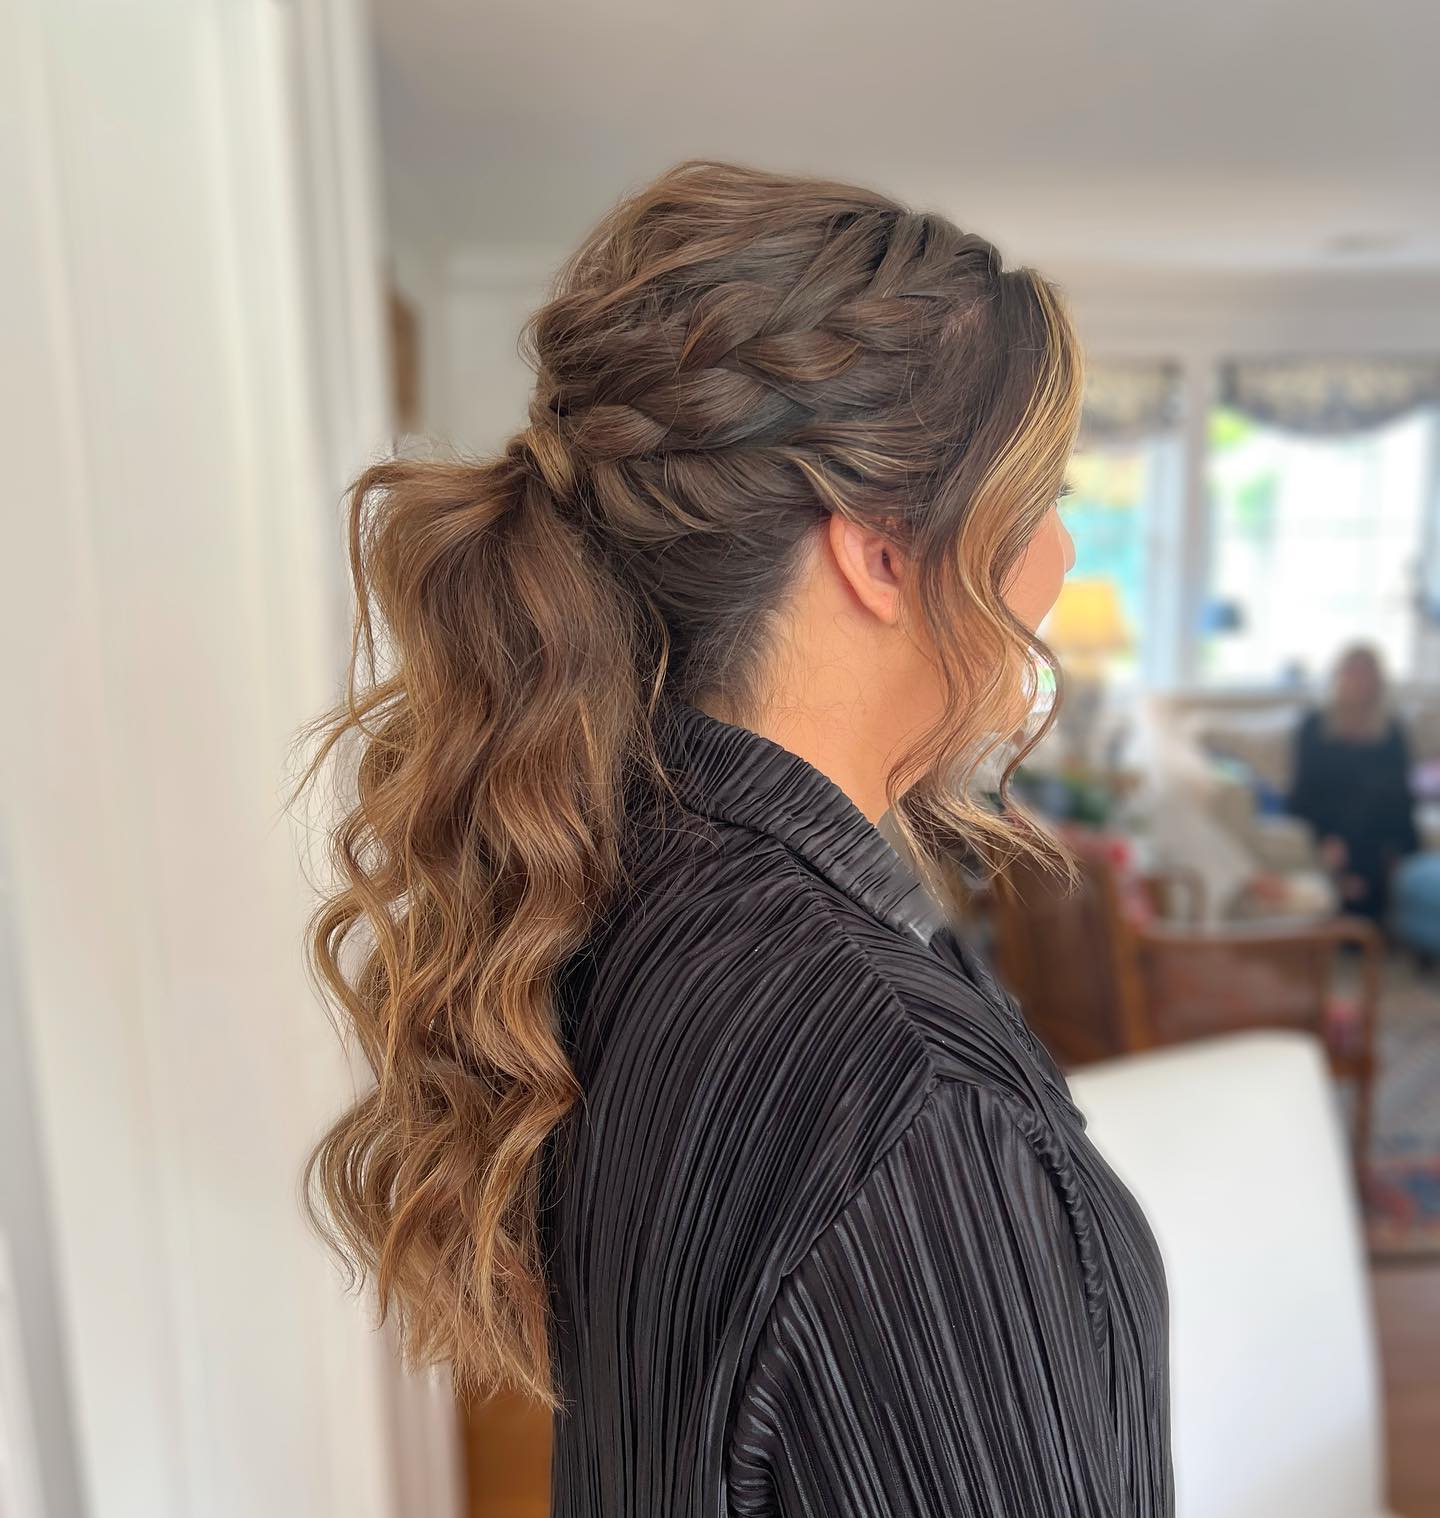 mid-height ponytail with side braid